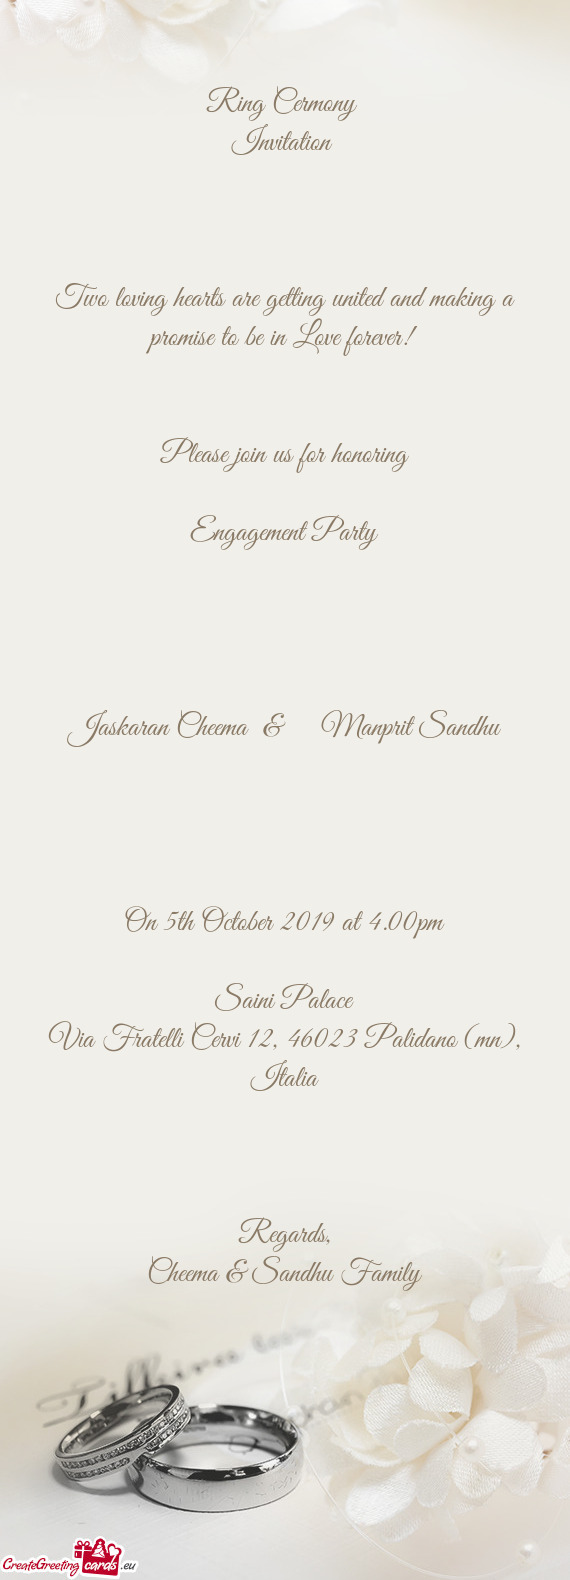 Love forever! 
 
 
 Please join us for honoring
 
 Engagement Party
 
 
 
 
 Jaskaran Cheema &